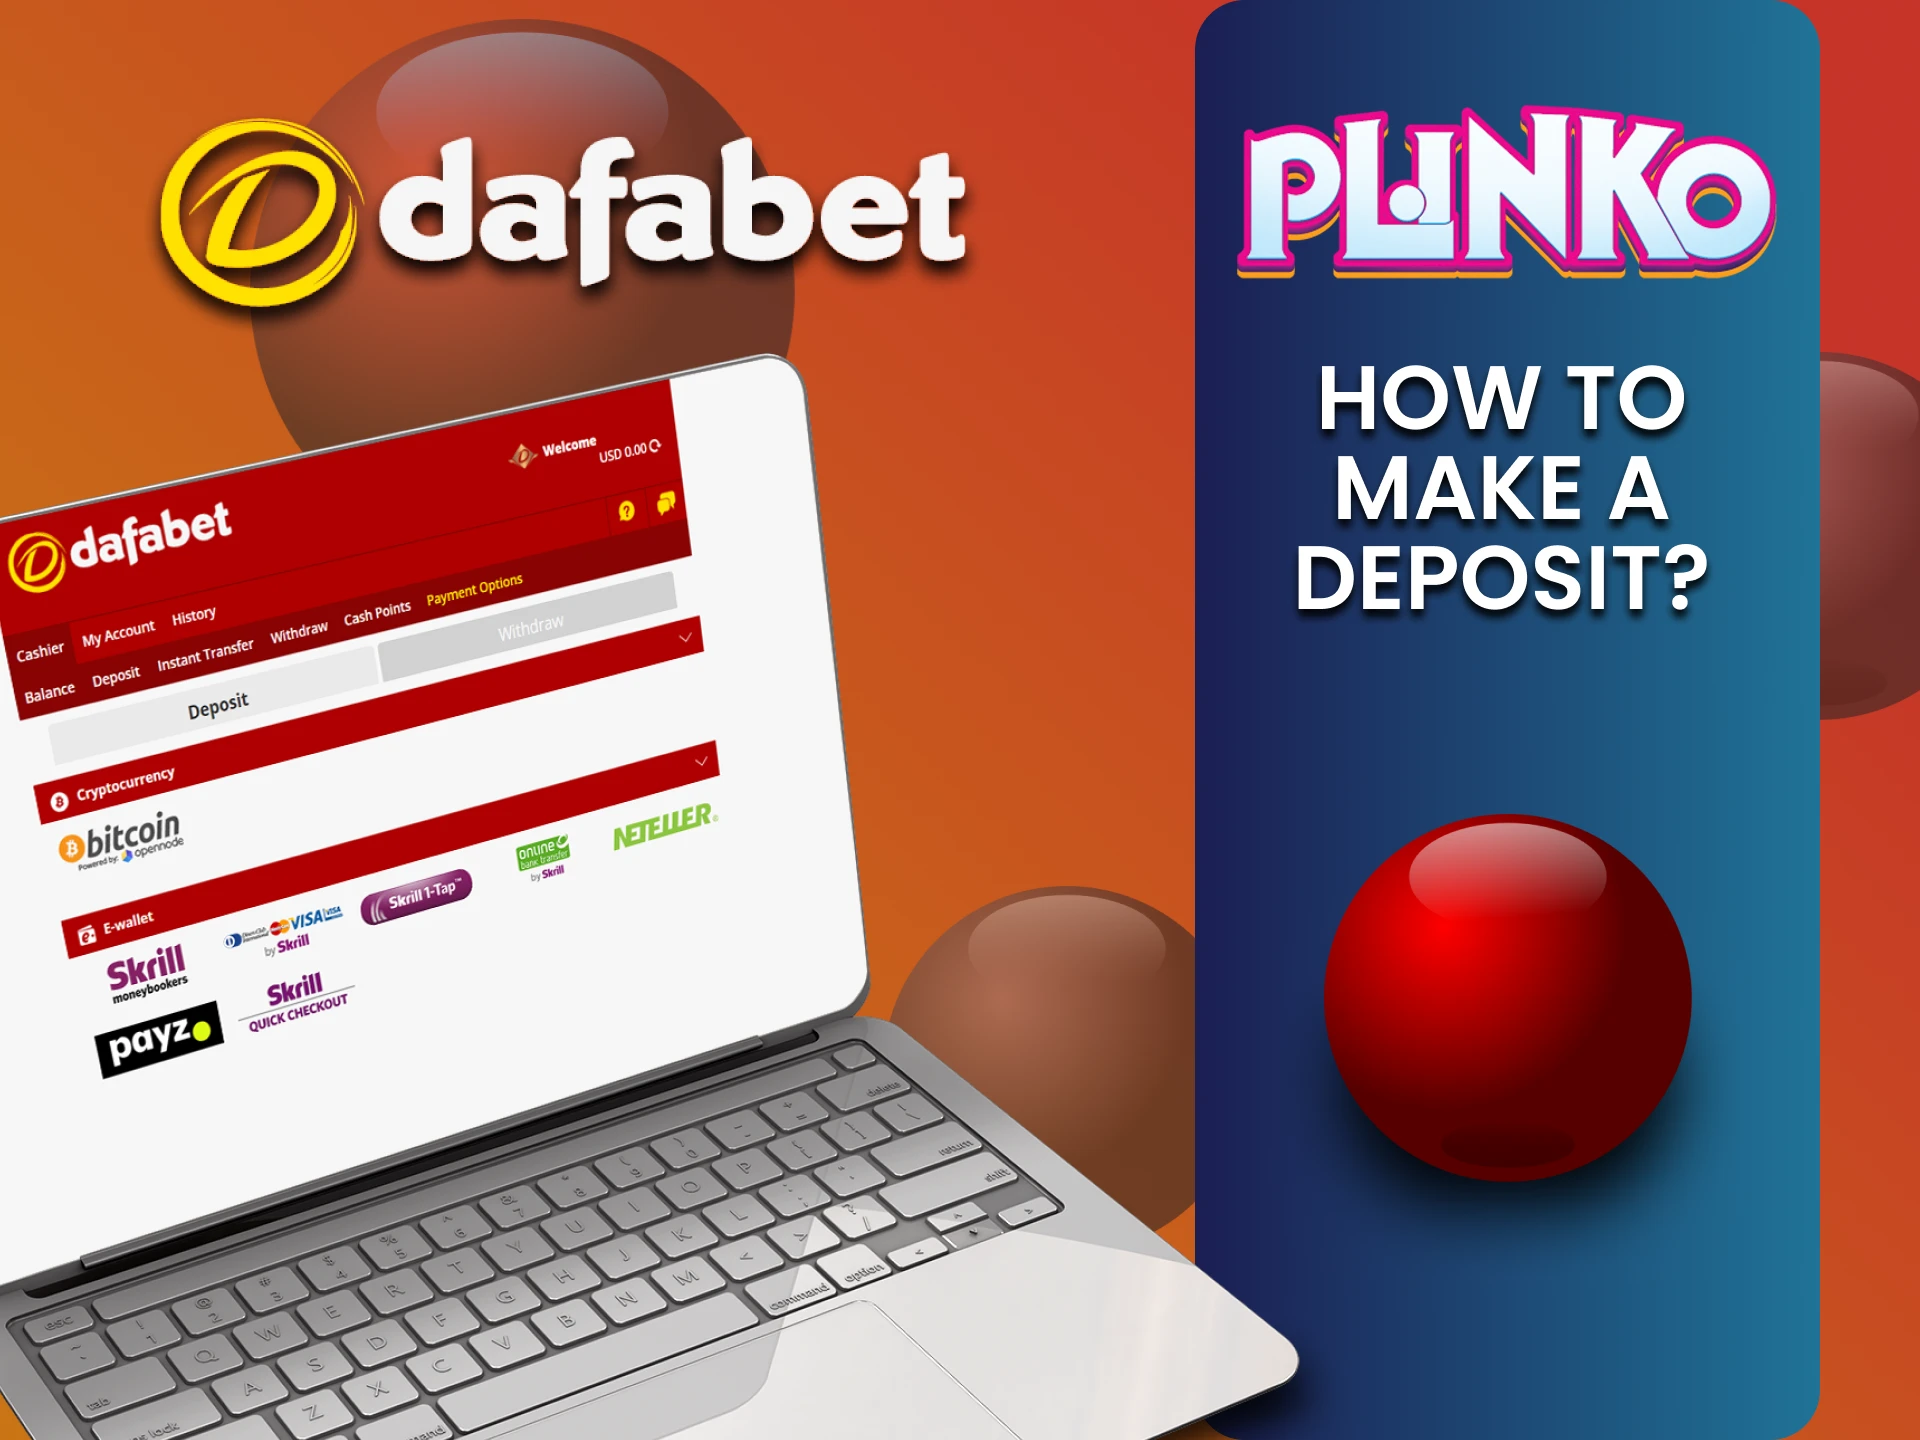 We will tell you how to top up your funds for the Plinko game on Dafabet.